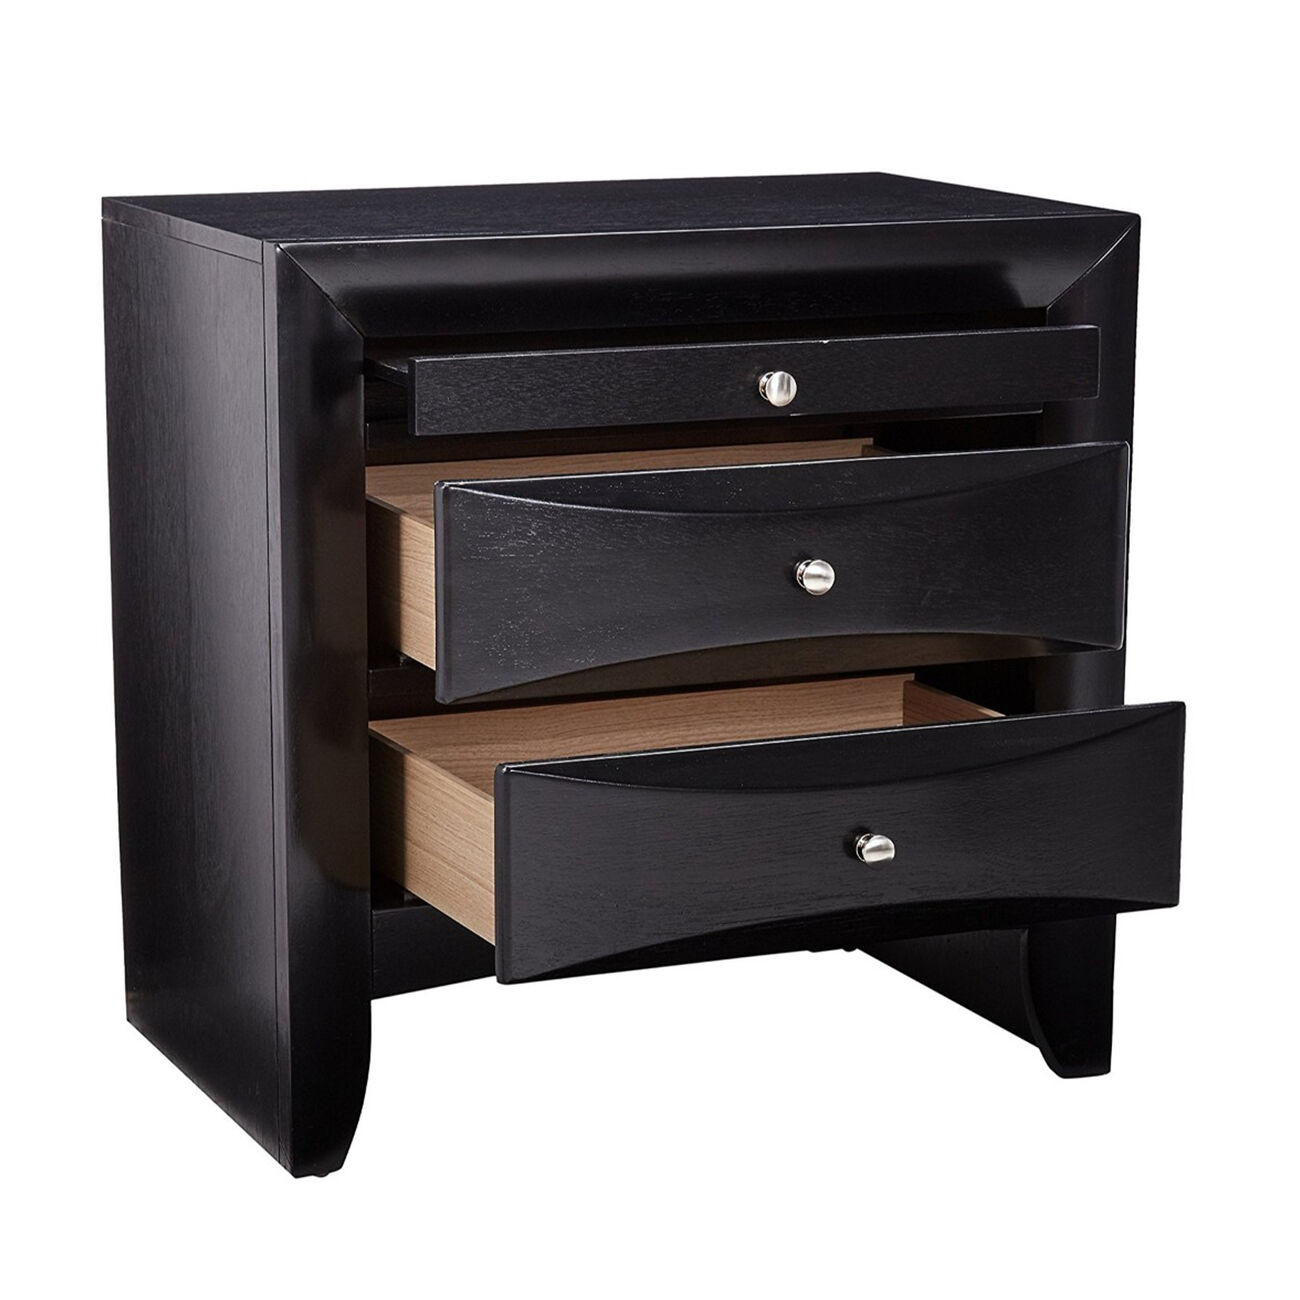 Wooden 2 Drawer Nightstand with tray, Black